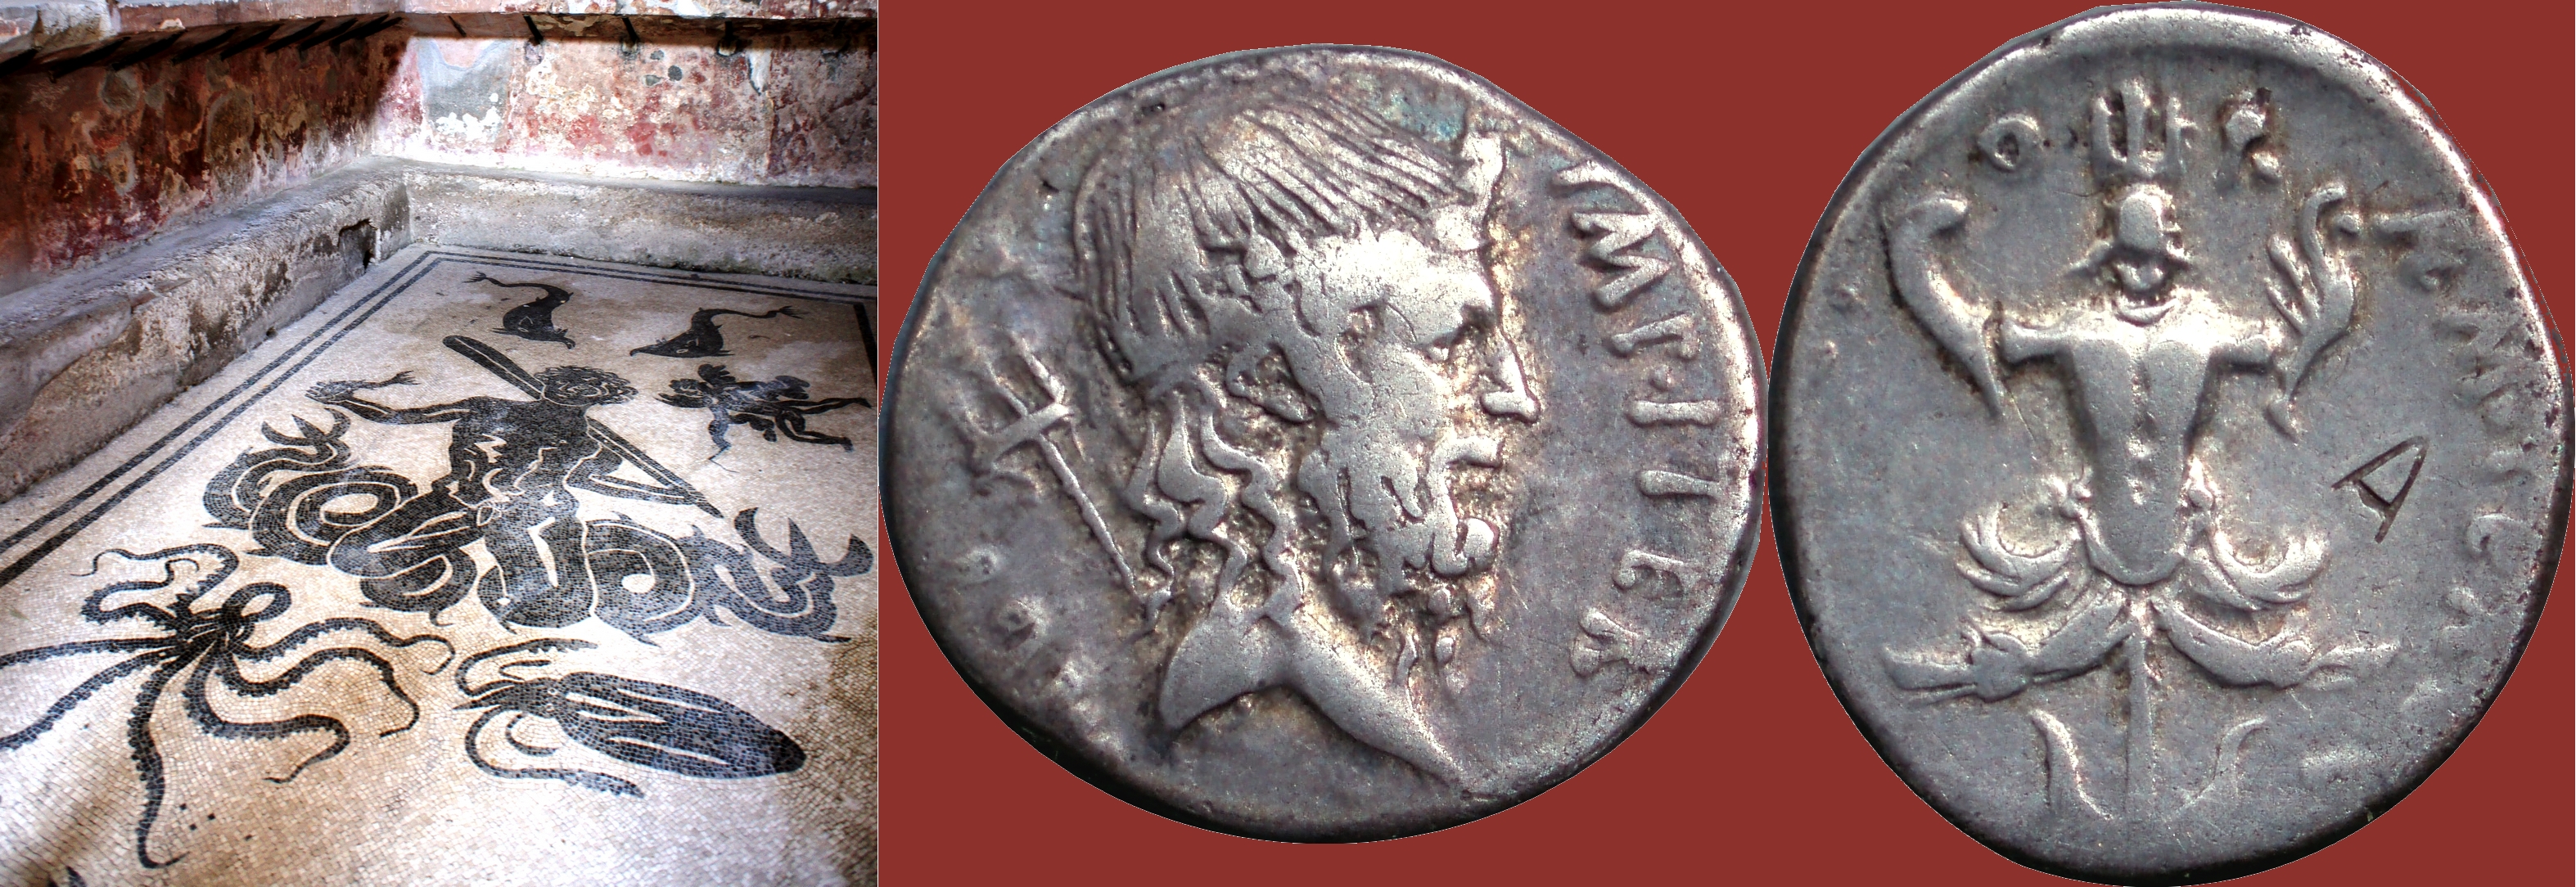 511/2 coin of Sextus Pompey with Neptune, trident, naval trophy and Scylla, beside mosaic of Triton son of Neptune, and sea creatures, at Herculaneum Women's bath